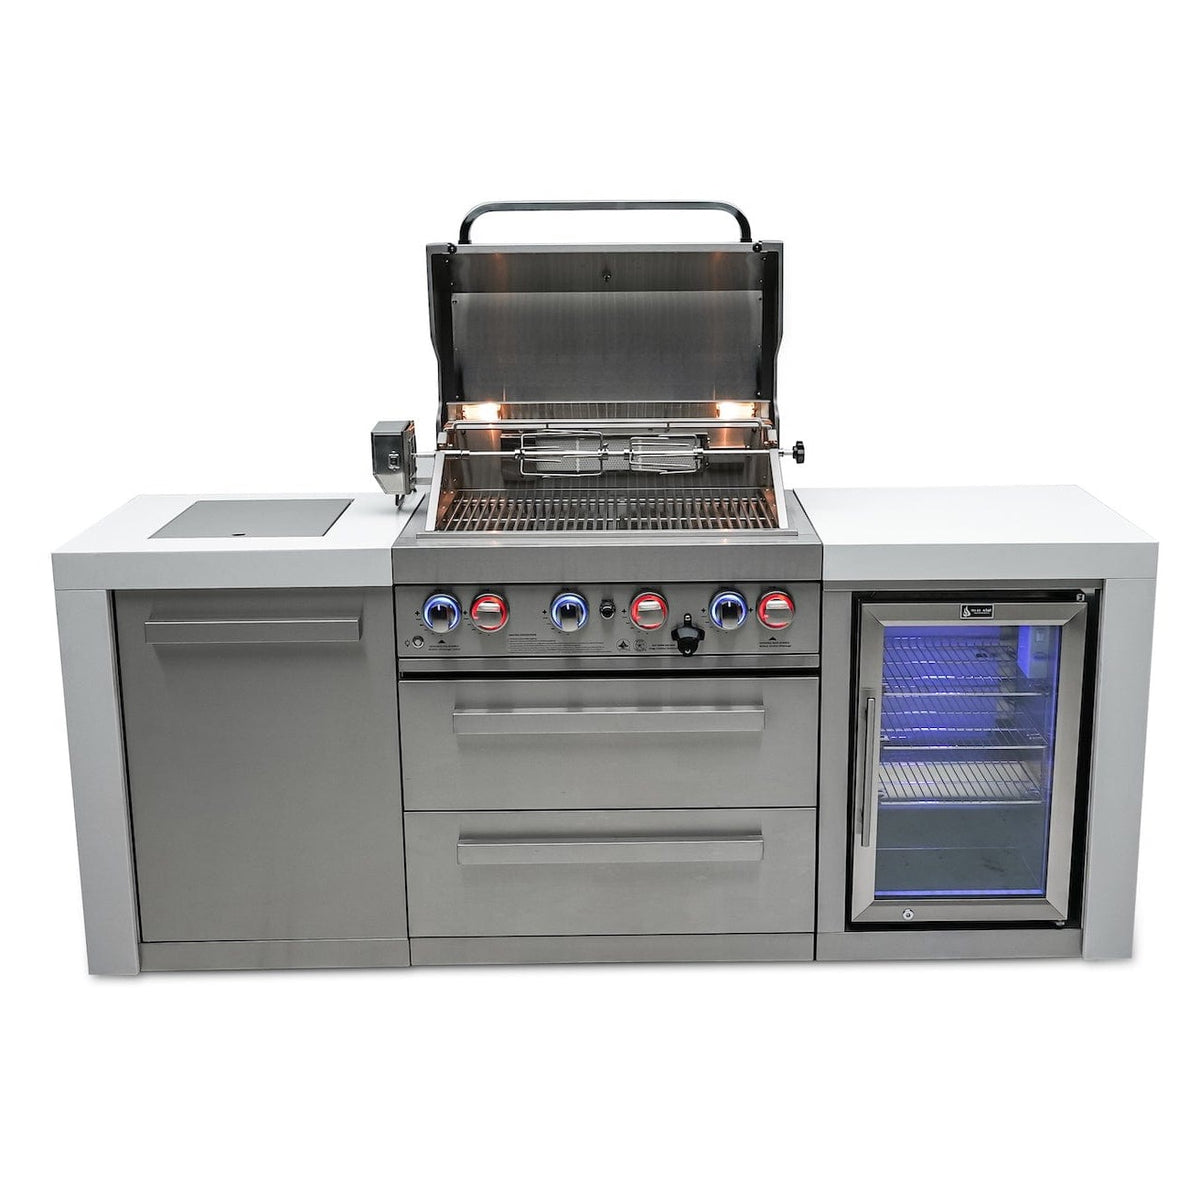 Mont Alpi Islands Mont Alpi 400 Deluxe Island with Fridge Cabinet / 4-Burner Grill, 2 Infrared Burners, Fridge, Stainless Steel, Waterfall Sides / MAi400-DFC